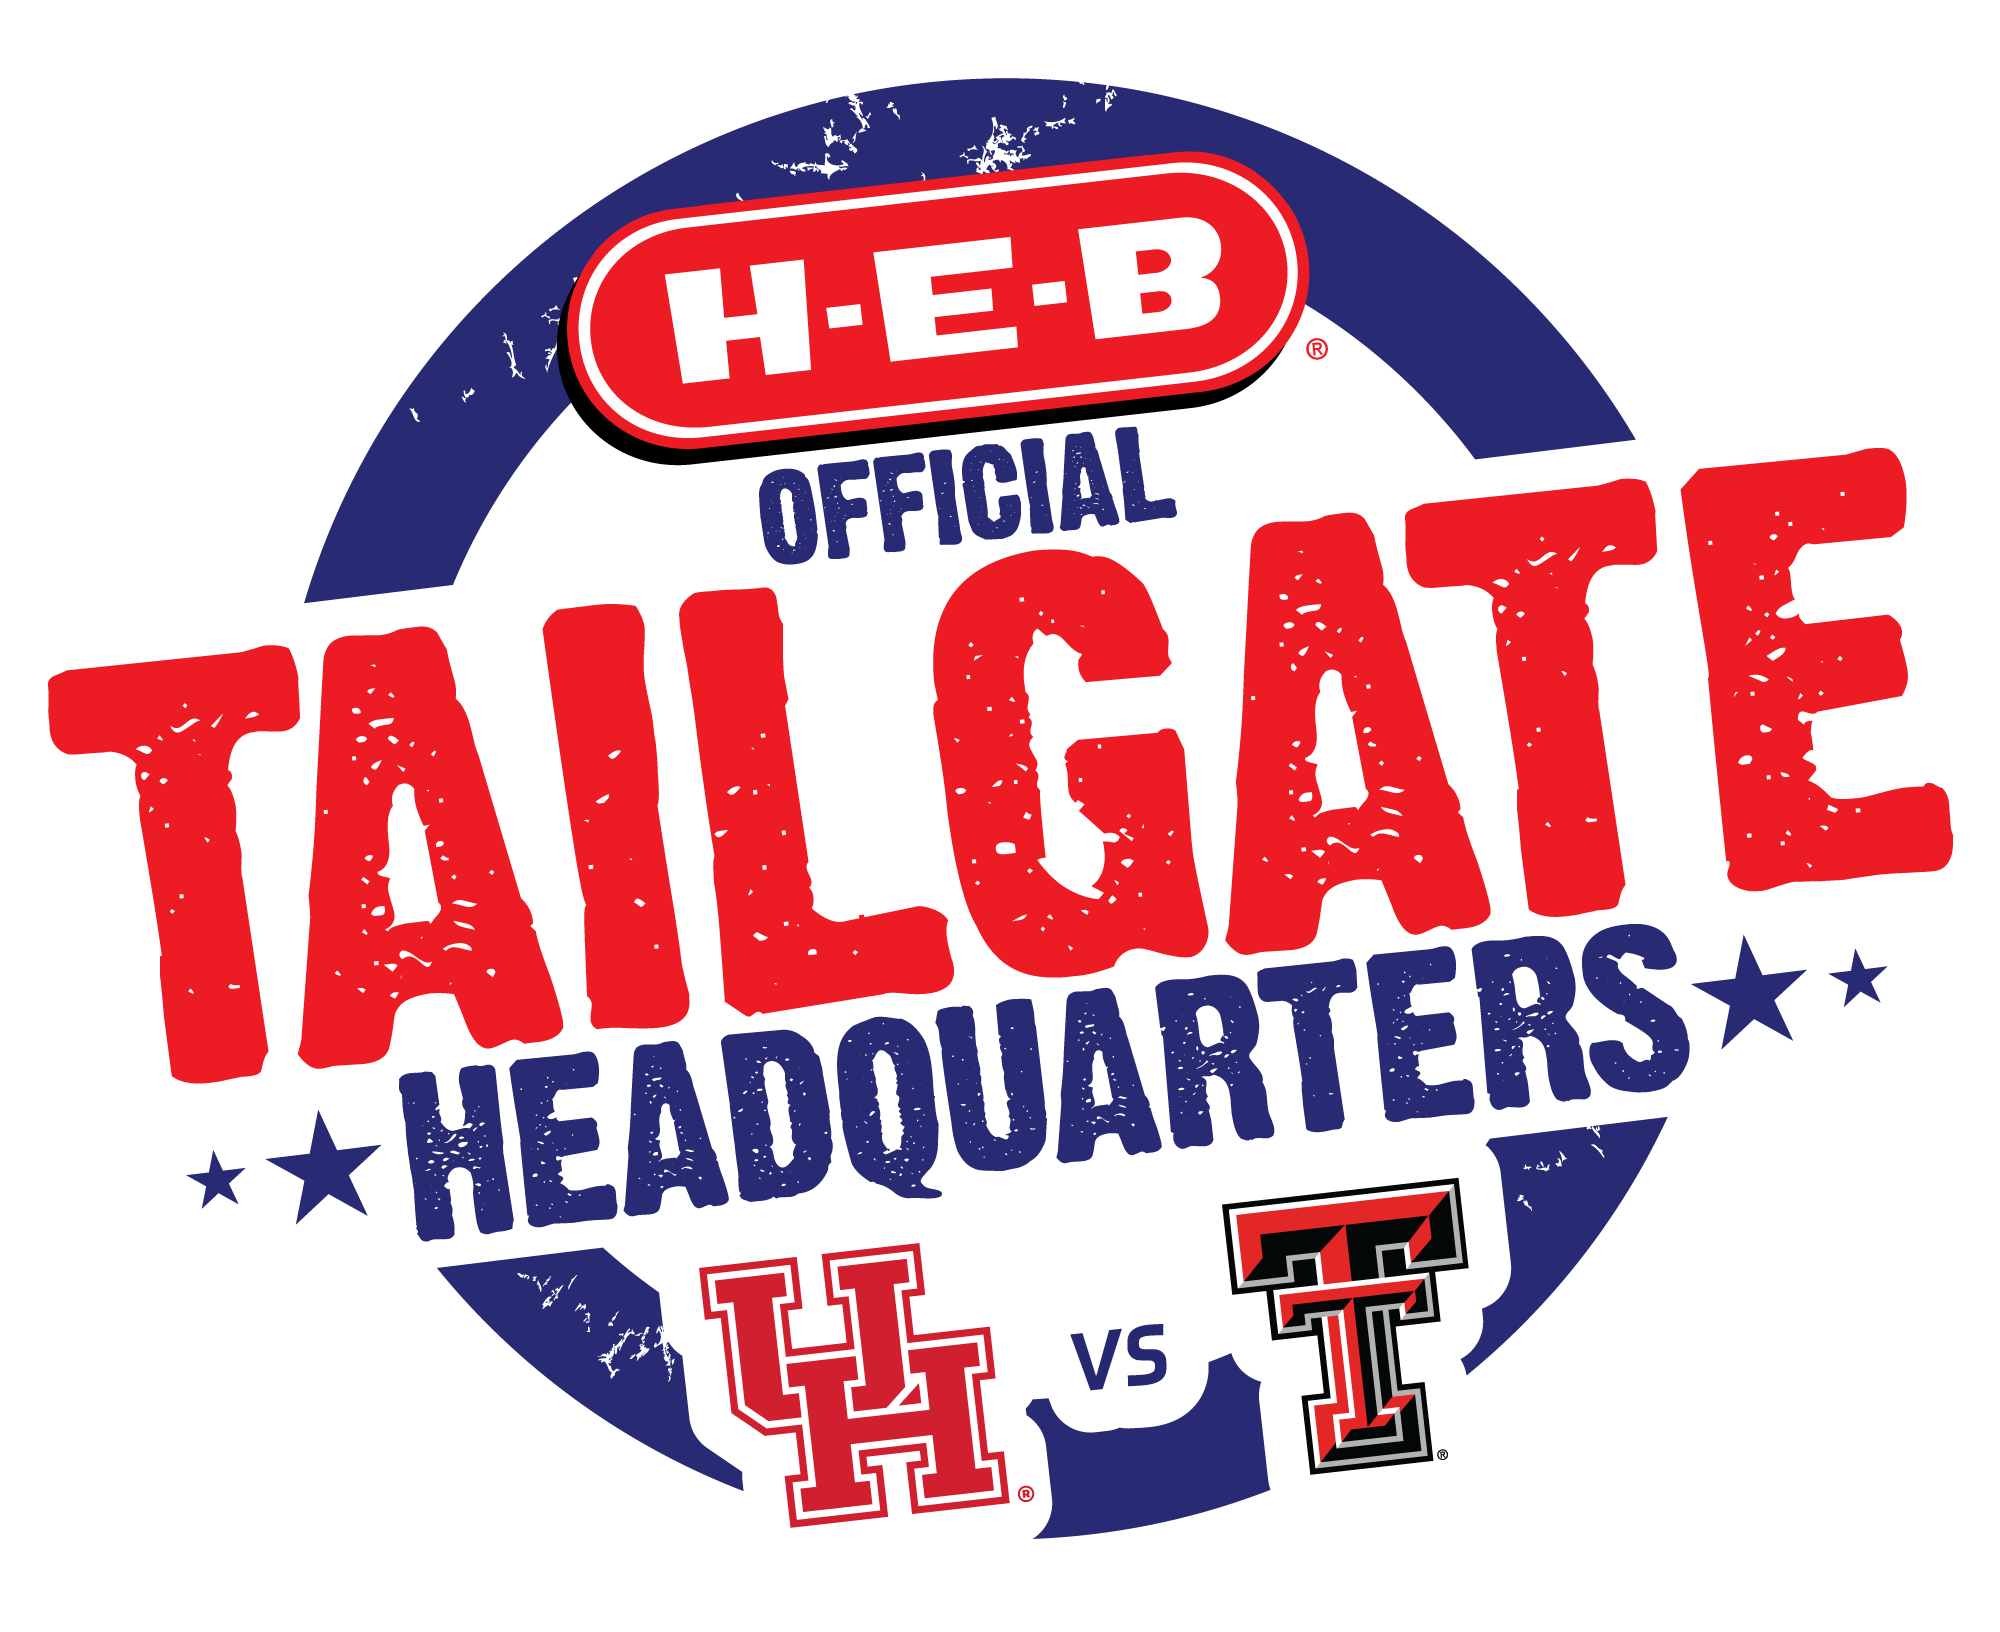 Tailgating Events